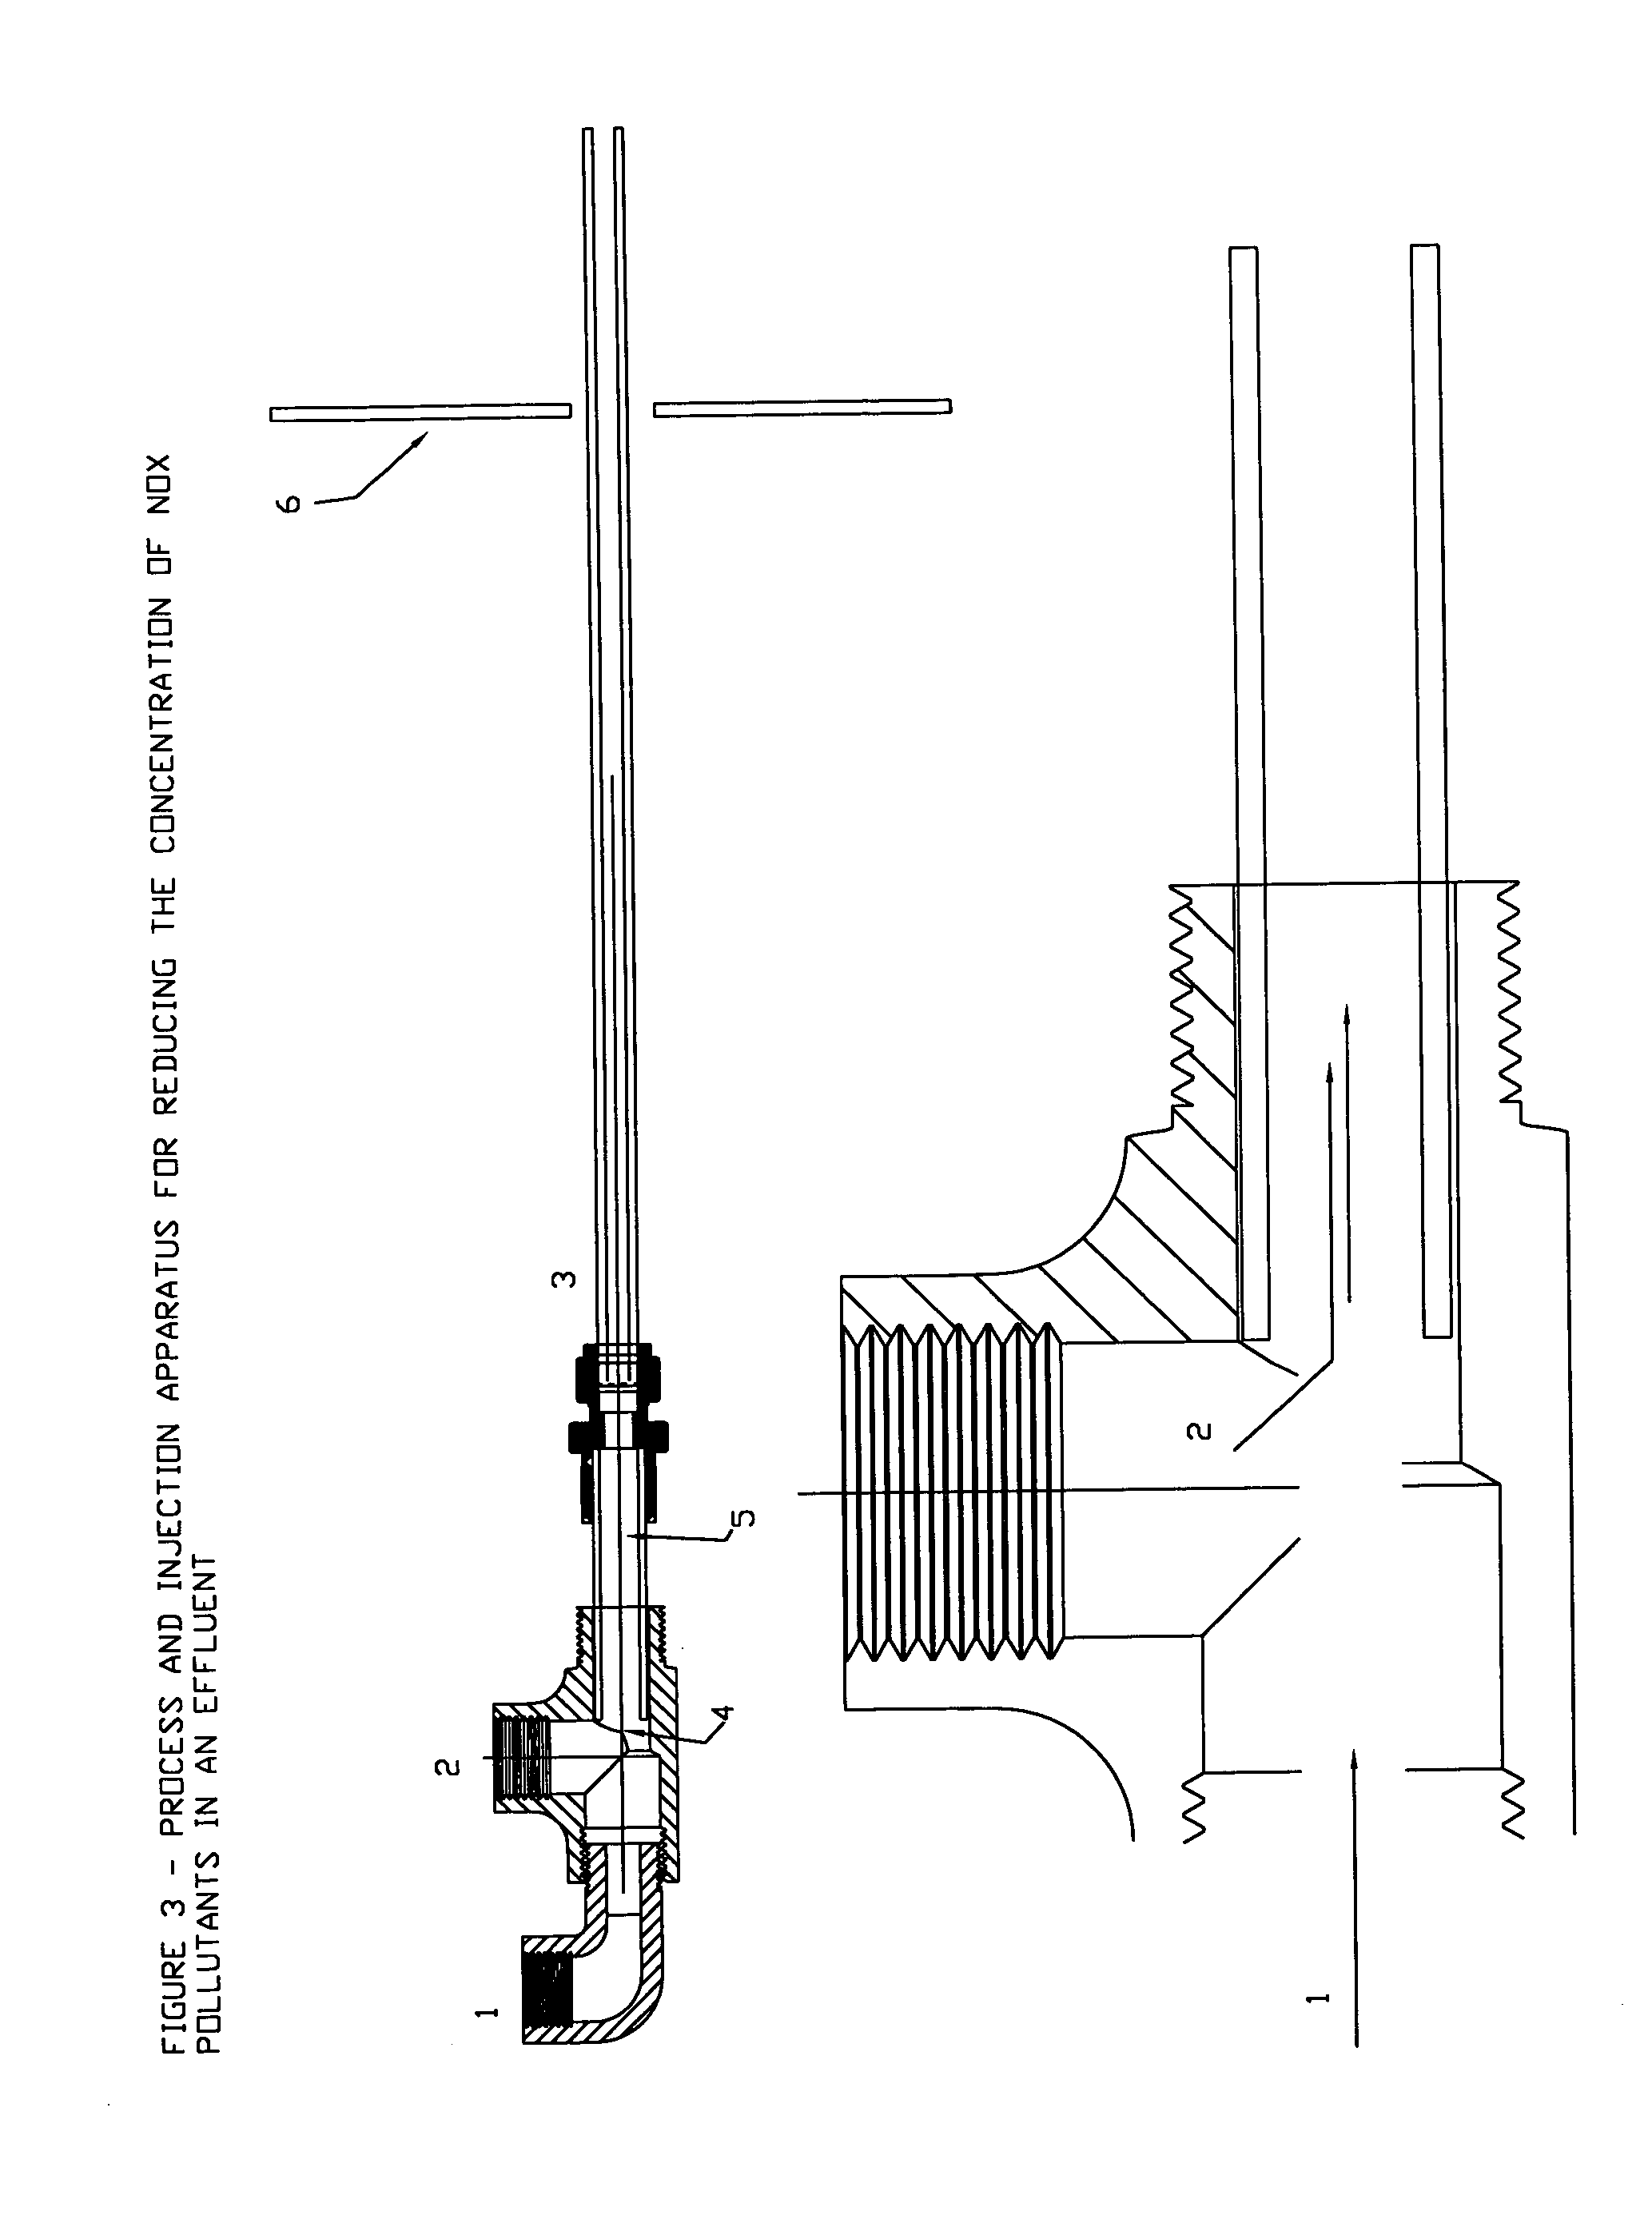 Process and injection apparatus for reducing the concentration of NOX pollutants in an effluent